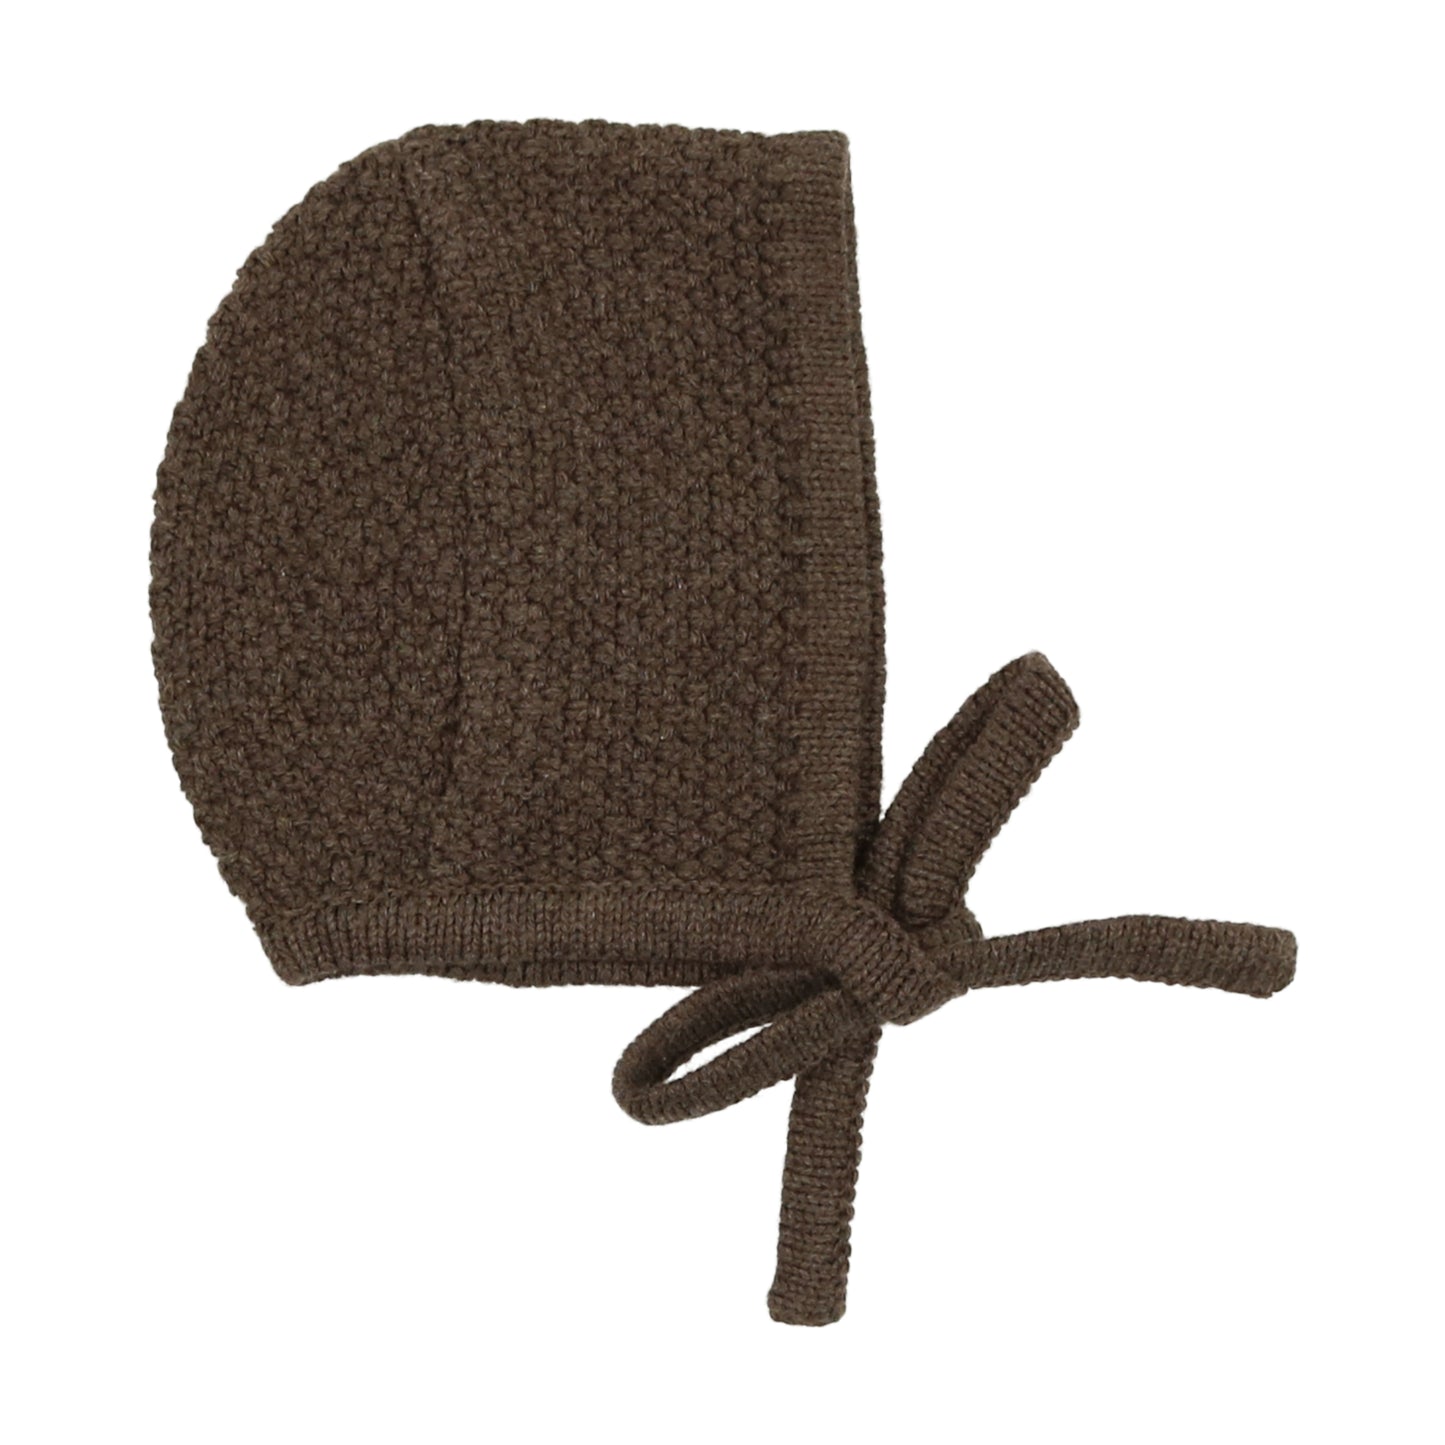 ANALOGIE HEATHER BROWN CABLE KNIT BONNET